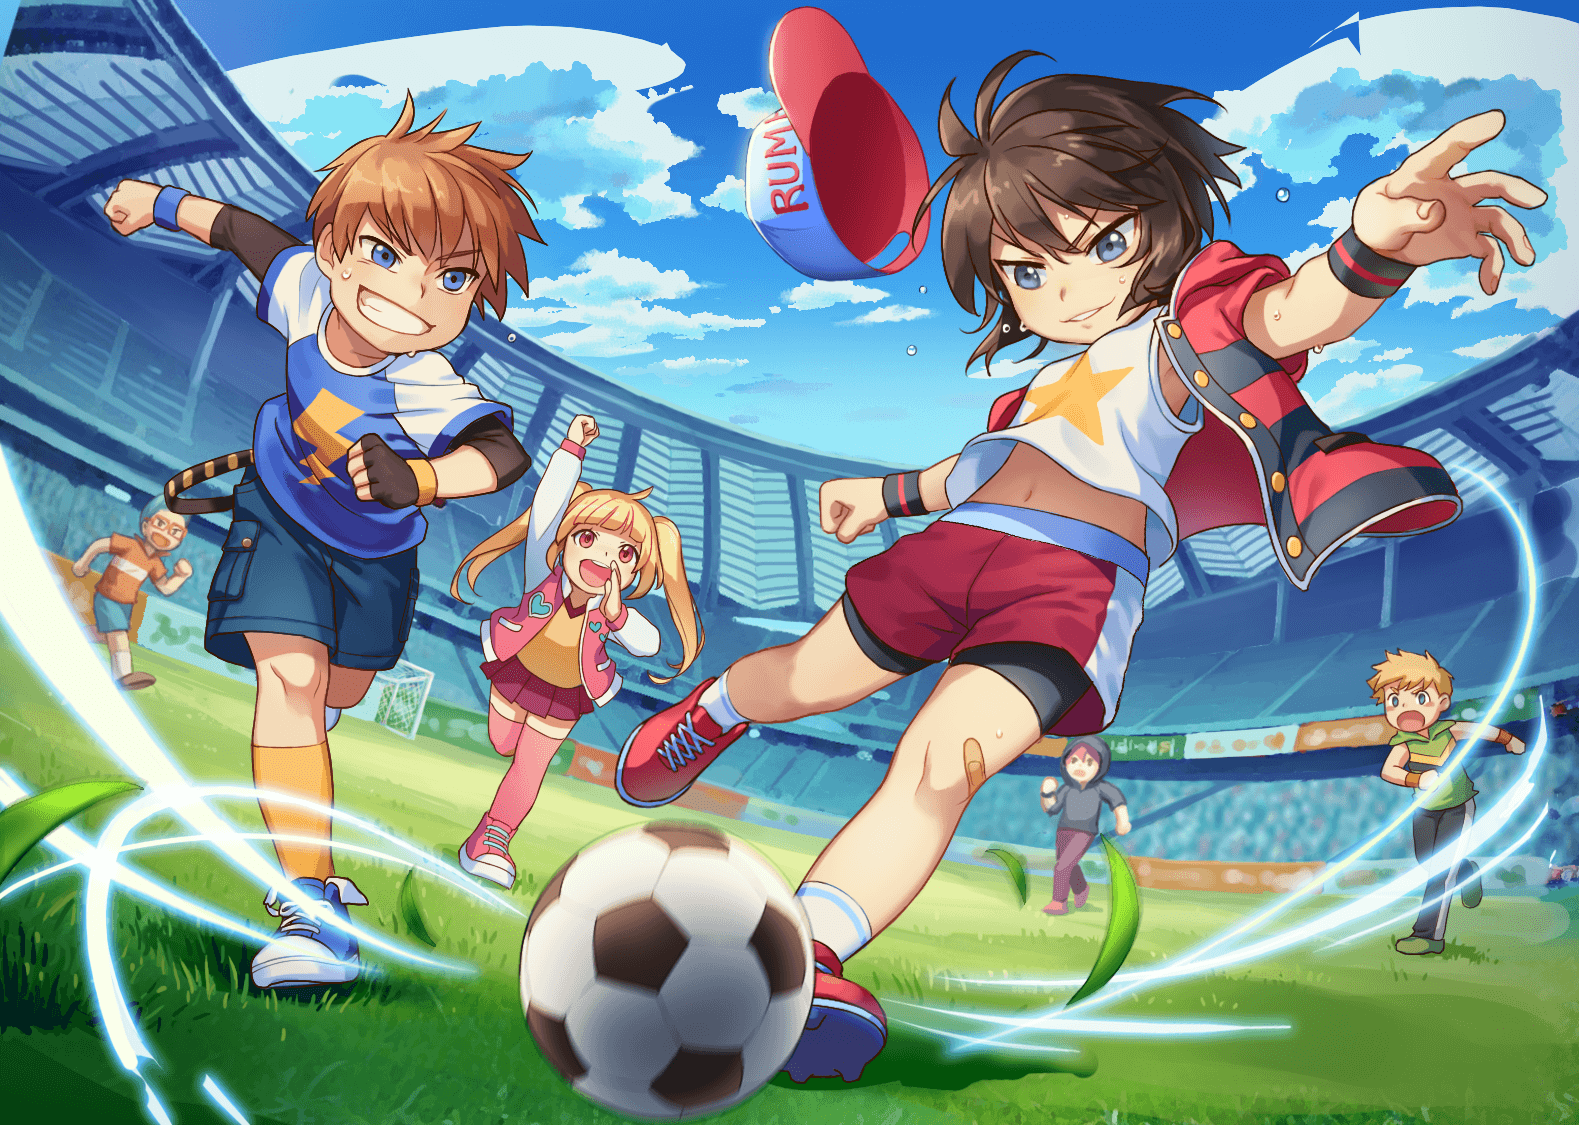 EVENT Dynamic Soccer: Special Event Mode!